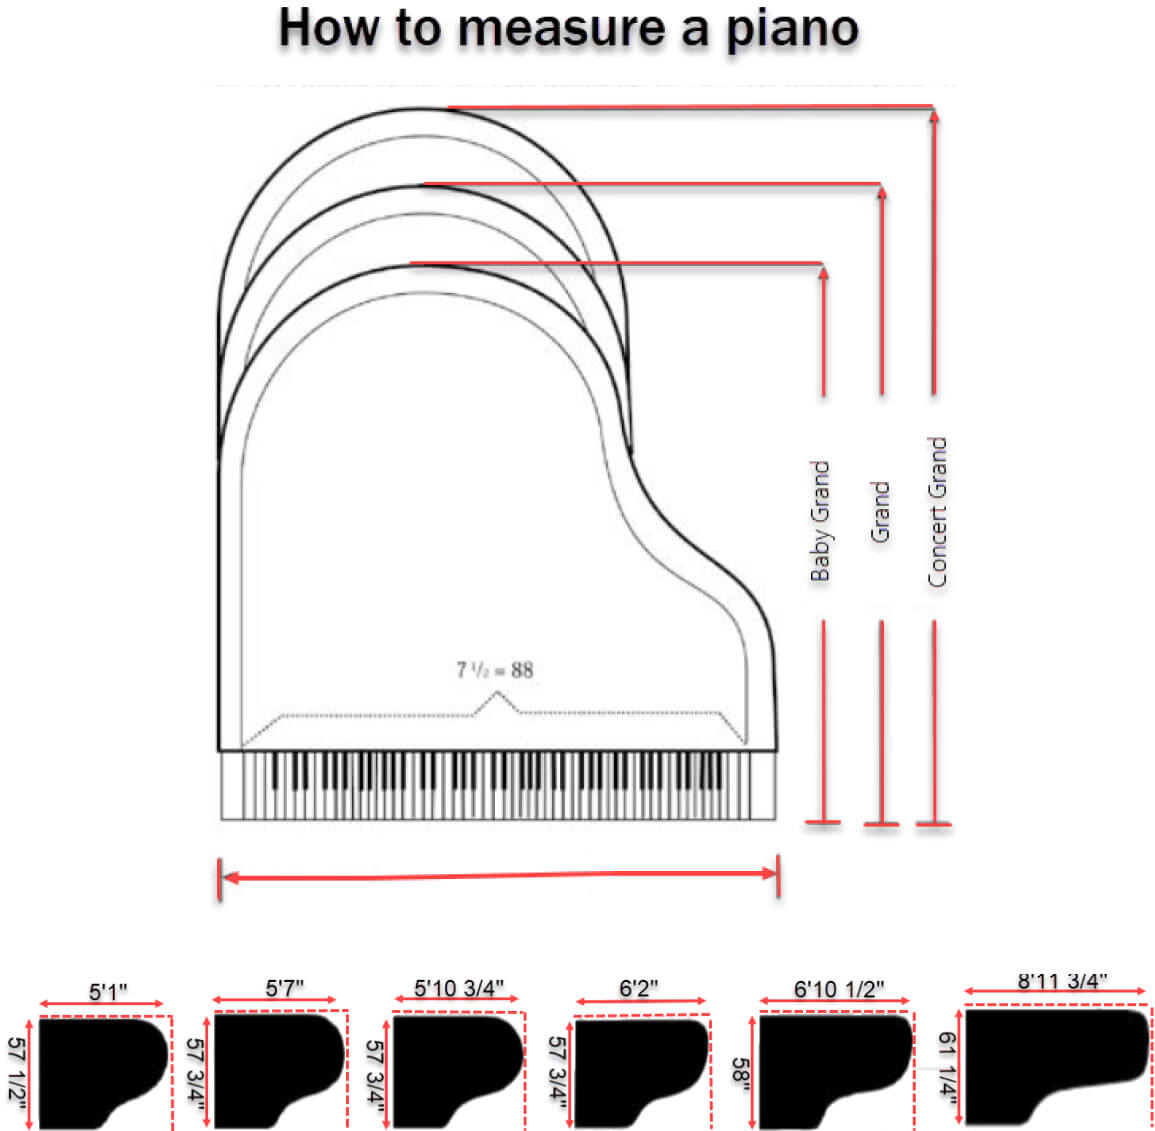 Graphic showing various types of pianos and explaining how to measure them.